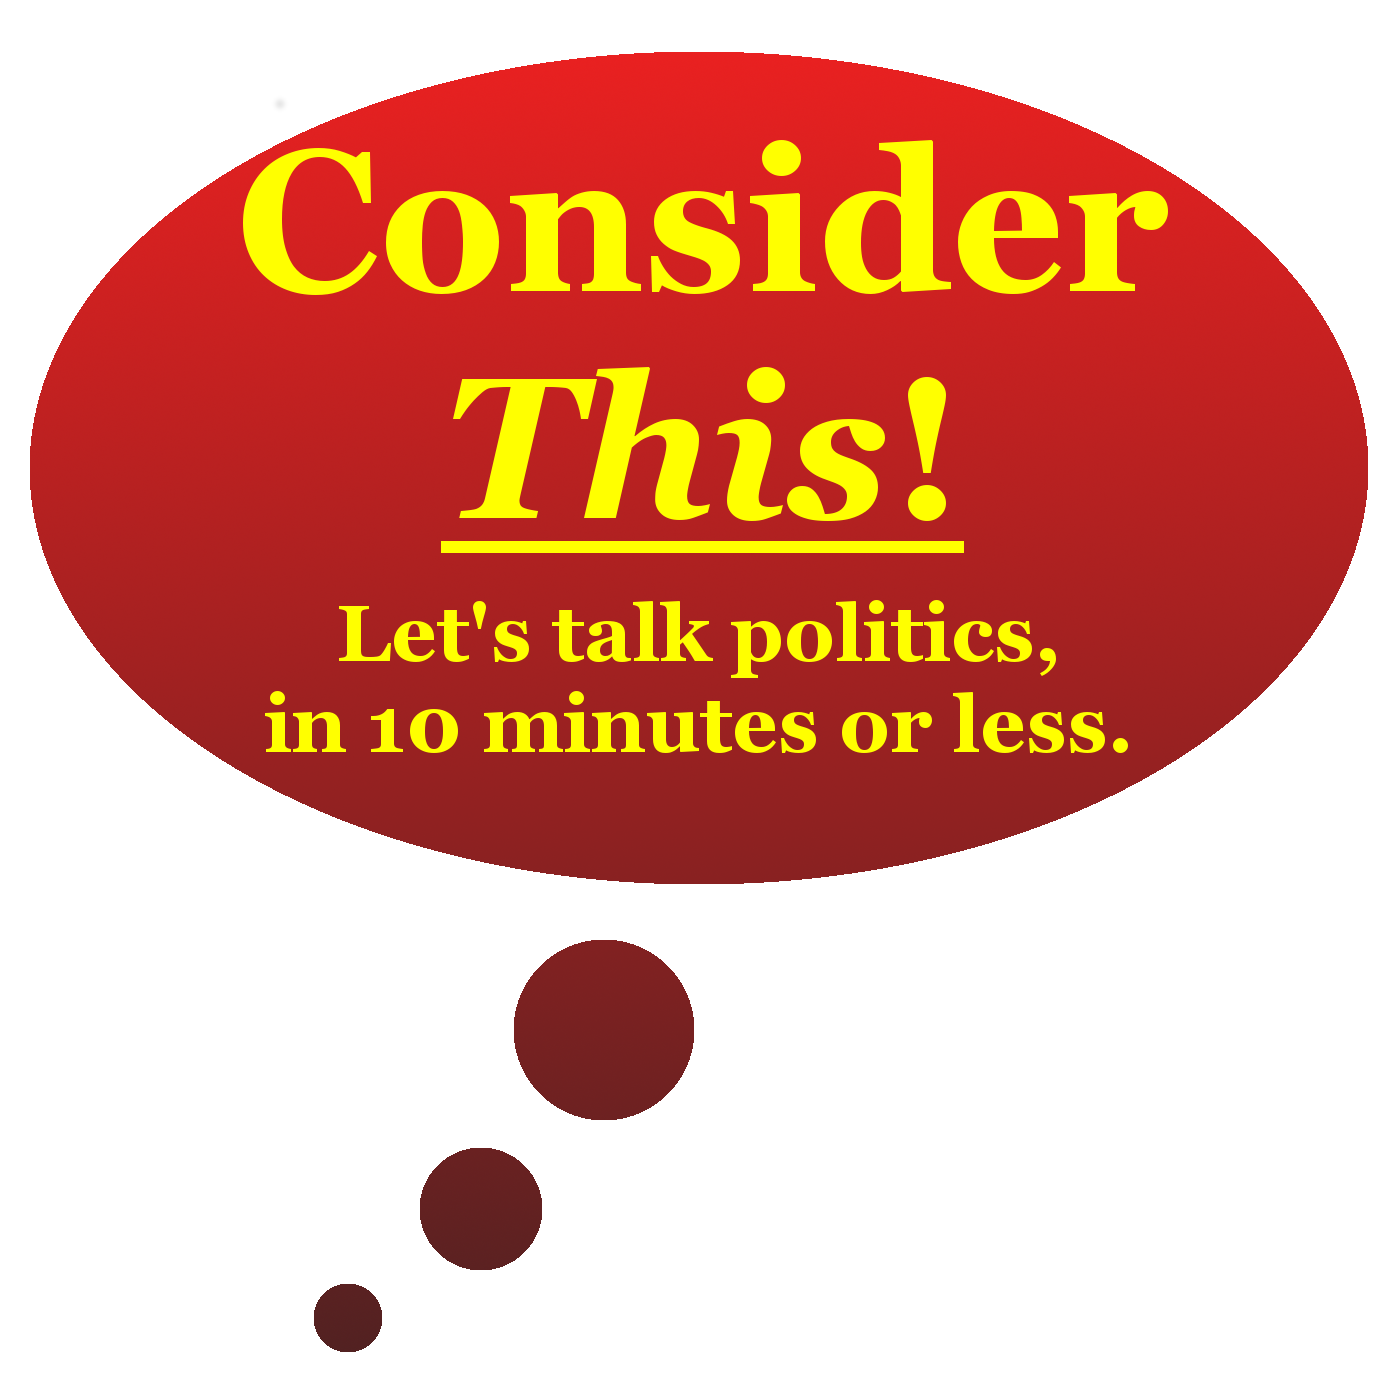 Consider This! | Conservative political commentary in 10 minutes or less